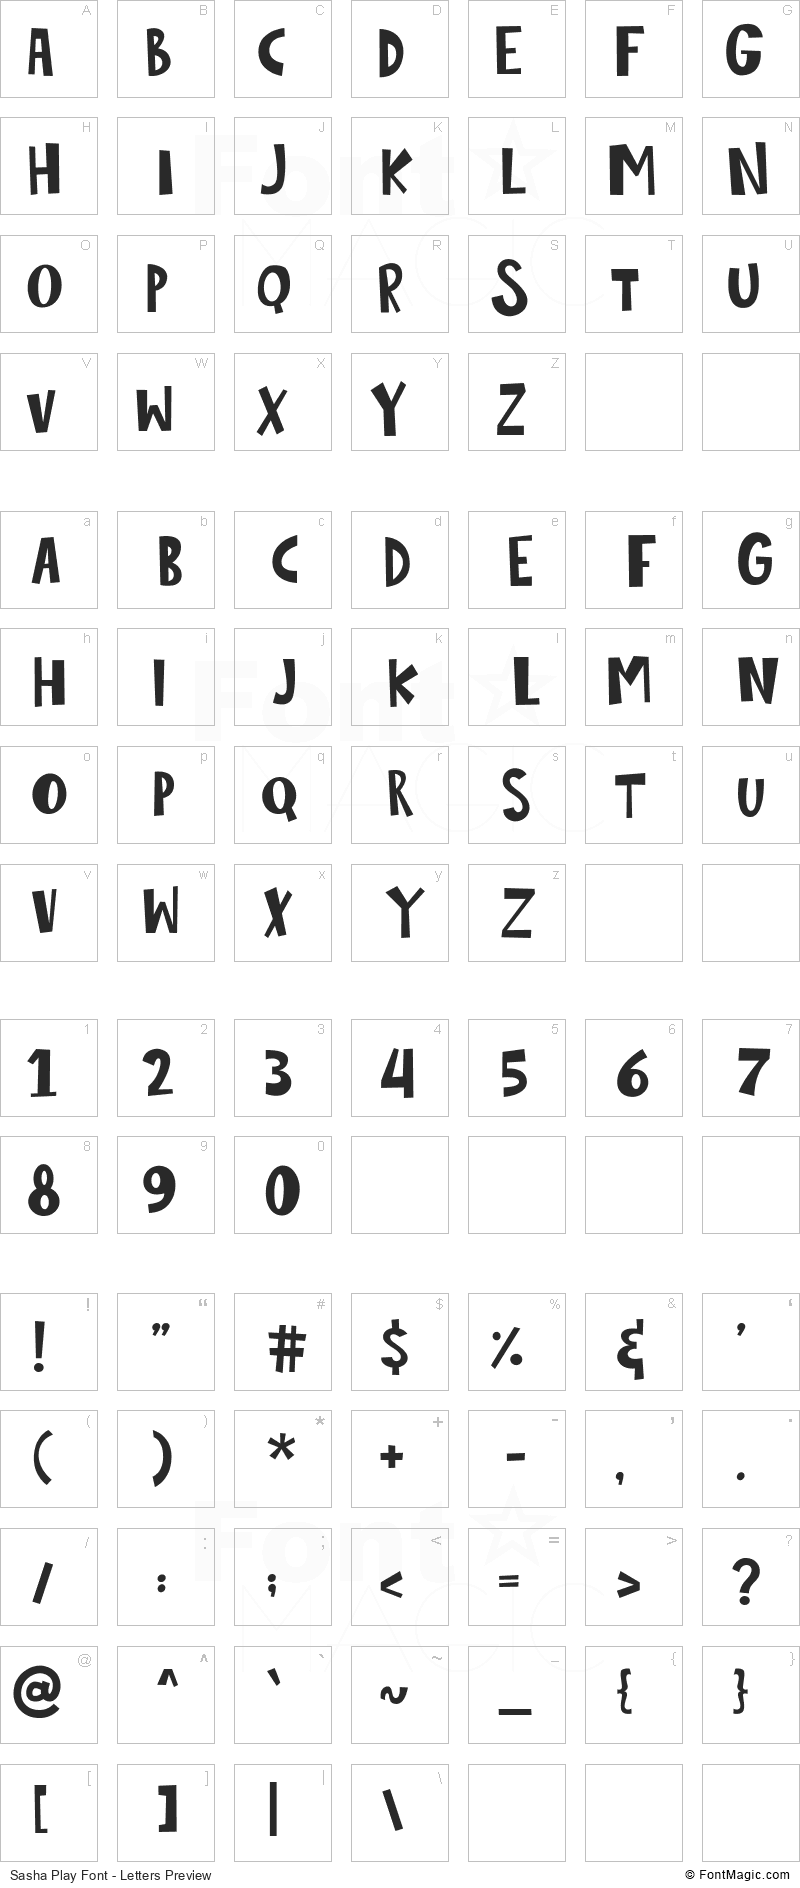 Sasha Play Font - All Latters Preview Chart